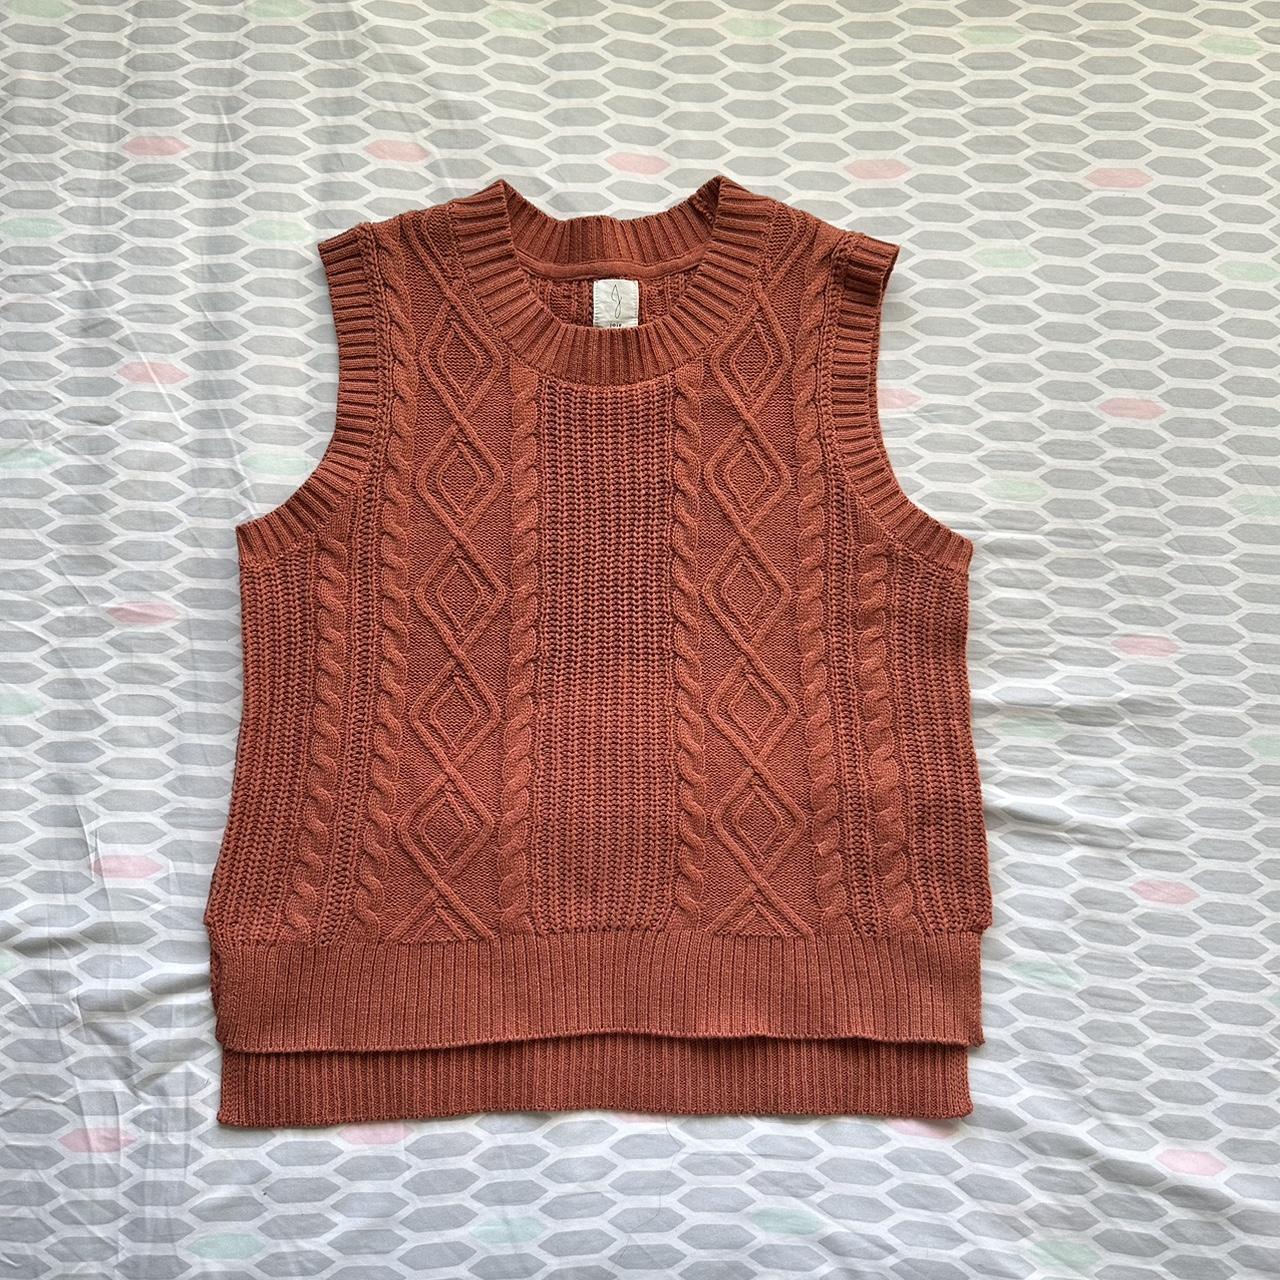 item listed by livsccloset